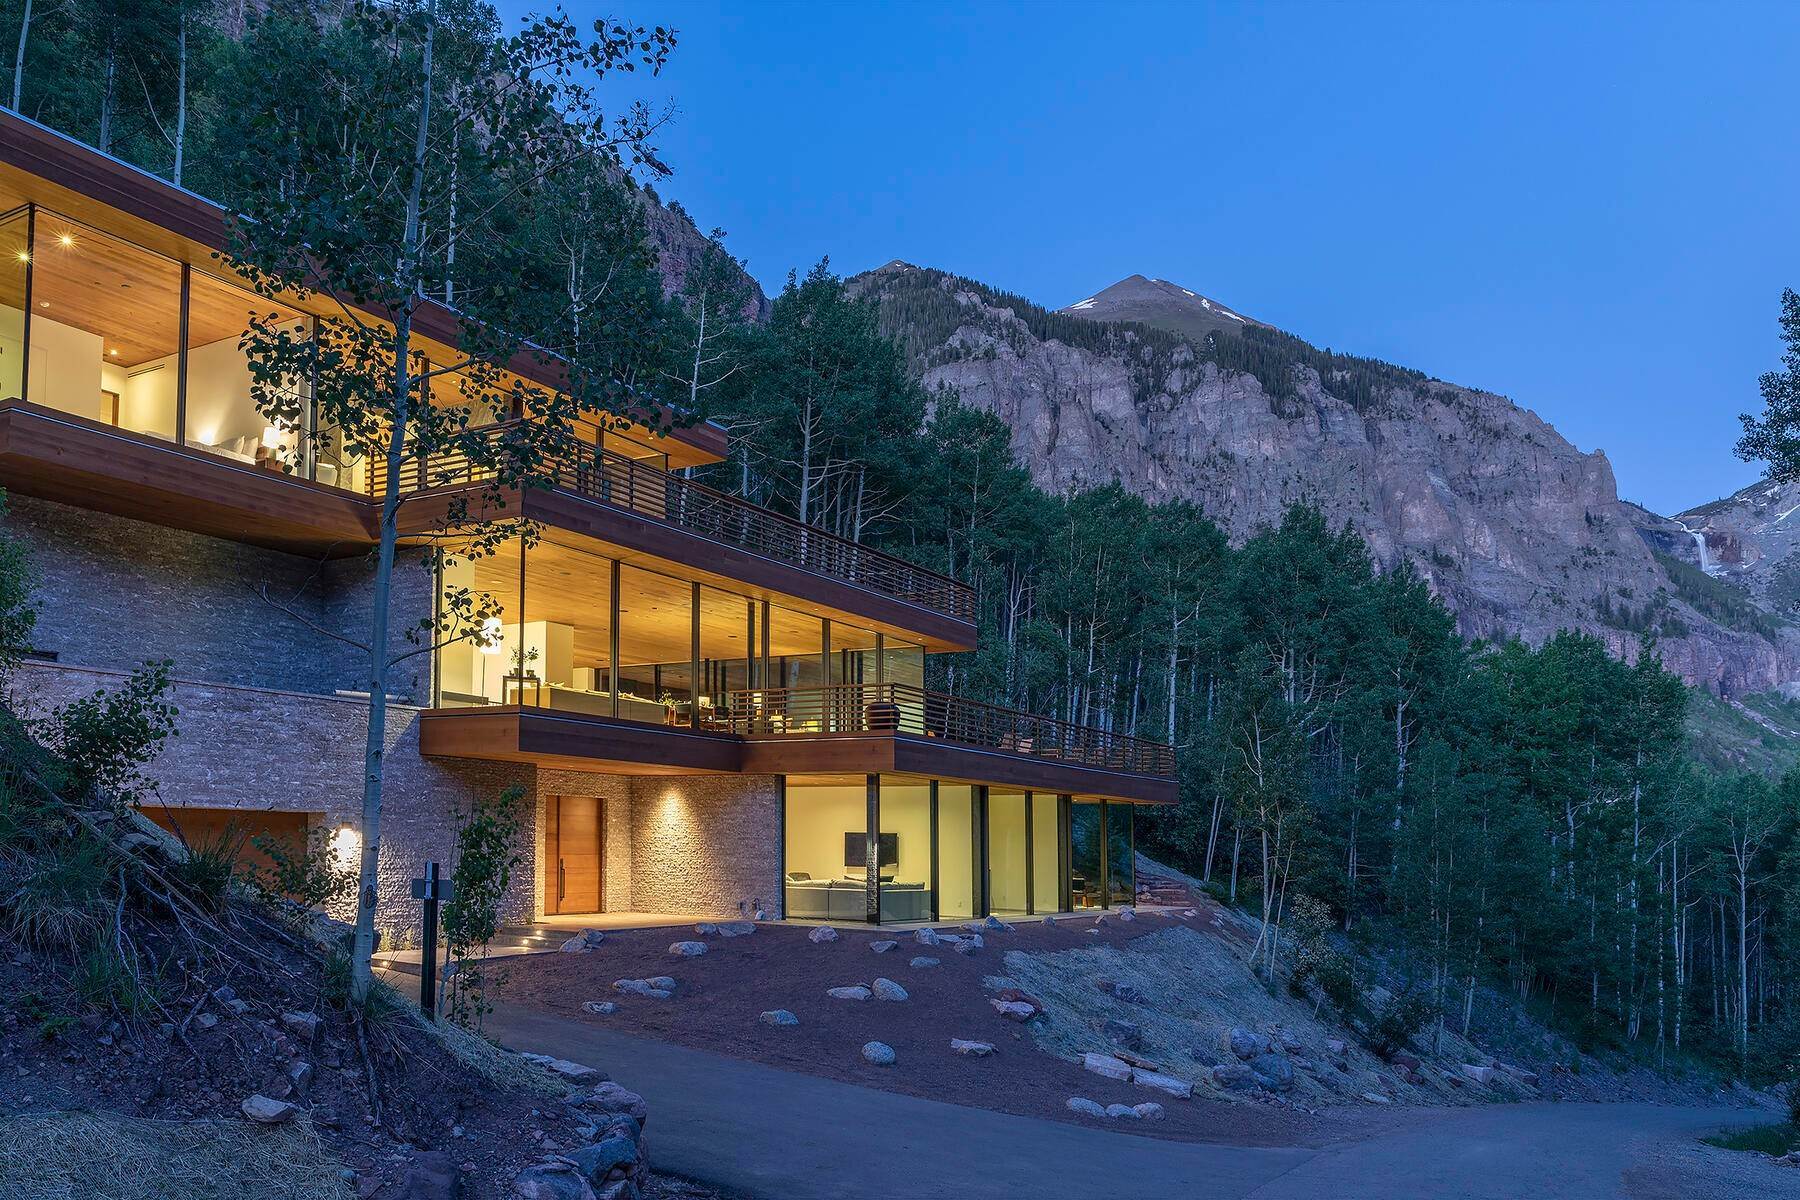 Single Family Homes for Sale at An Extraordinary Retreat in the Heart of Telluride's Iconic Box Canyon 300 Royer Lane Telluride, Colorado 81435 United States